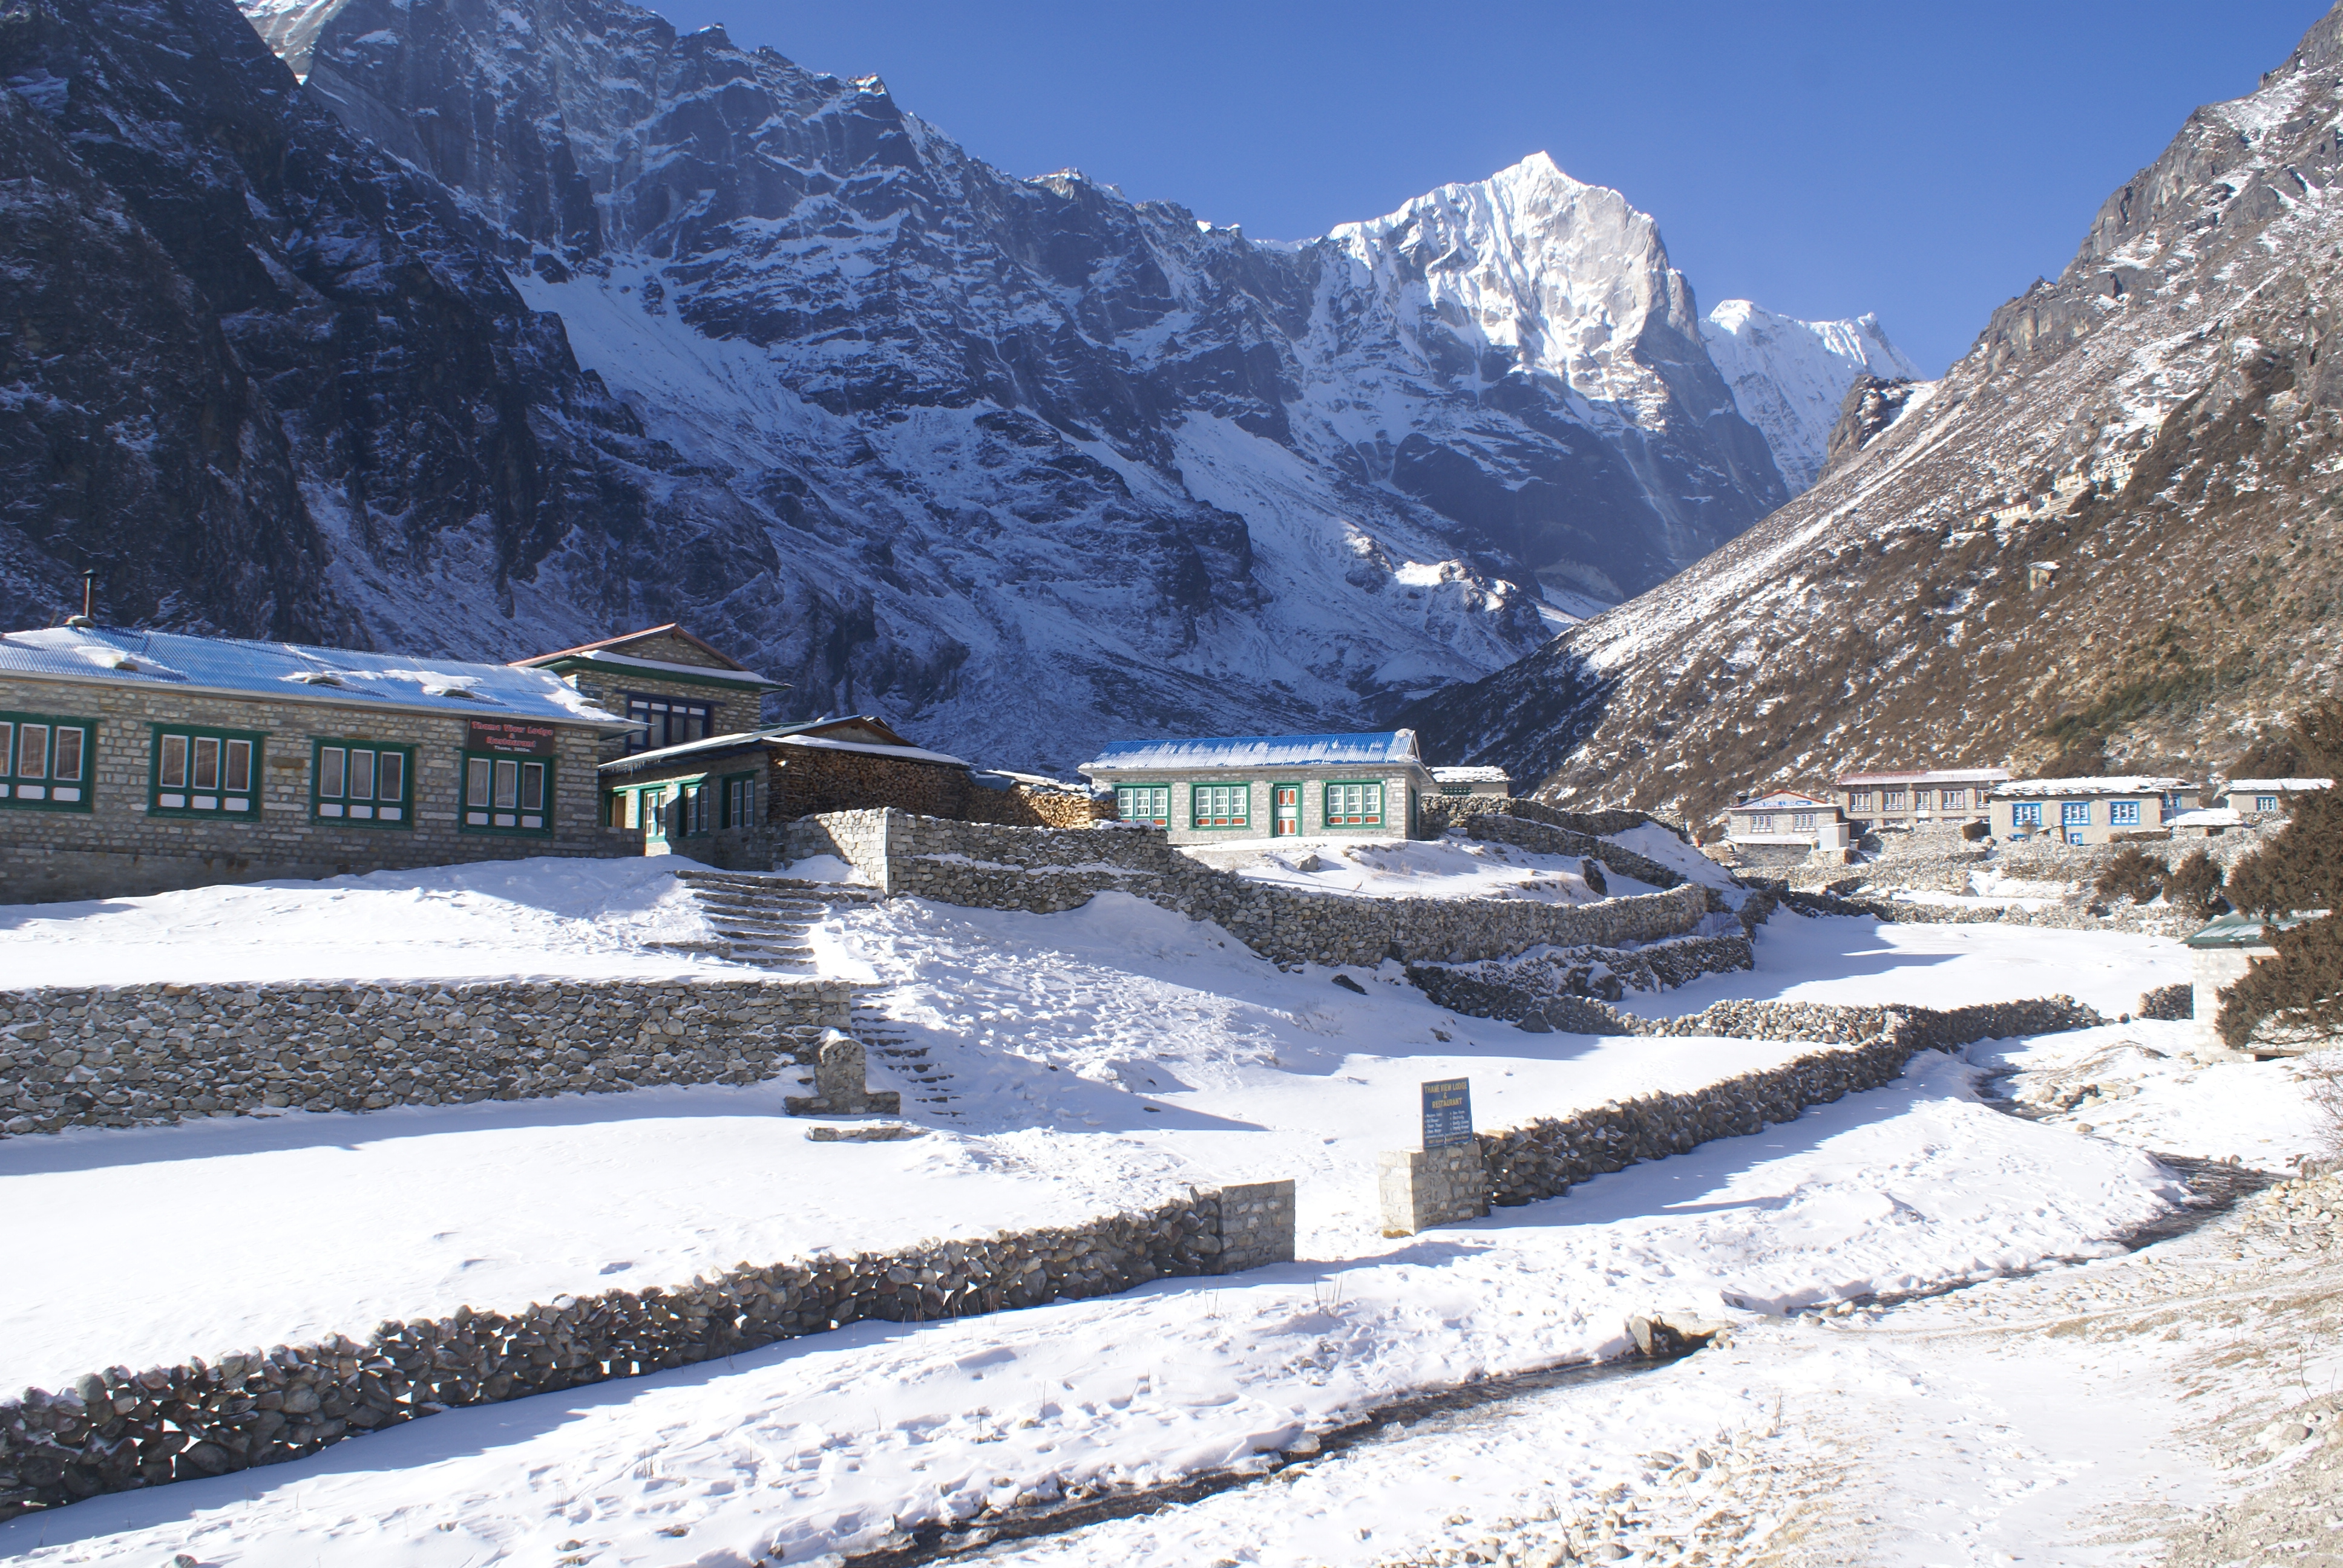 Day for acclimatization in Namche Bazaar. Excursion to Syangboche and Thame village. O/n at mountain Lodge.'